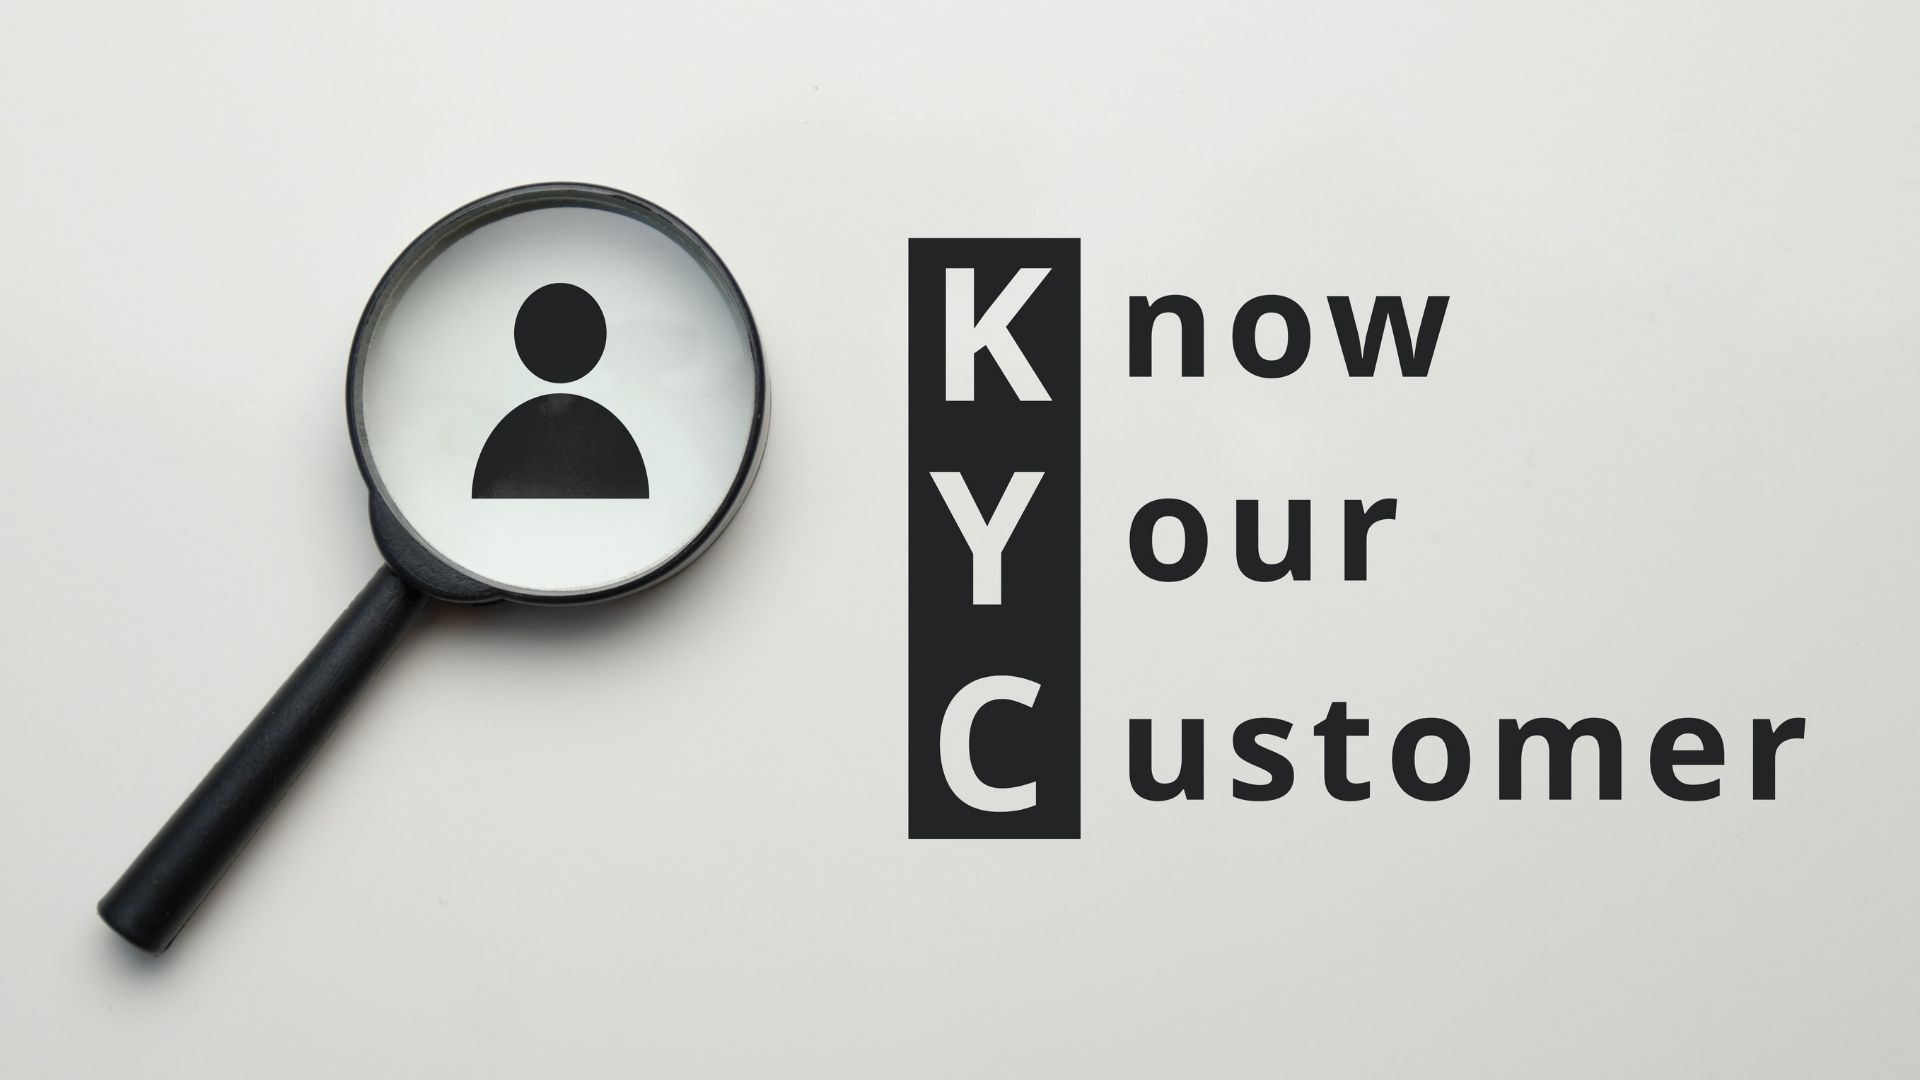  Kyc Meaning in Tamil